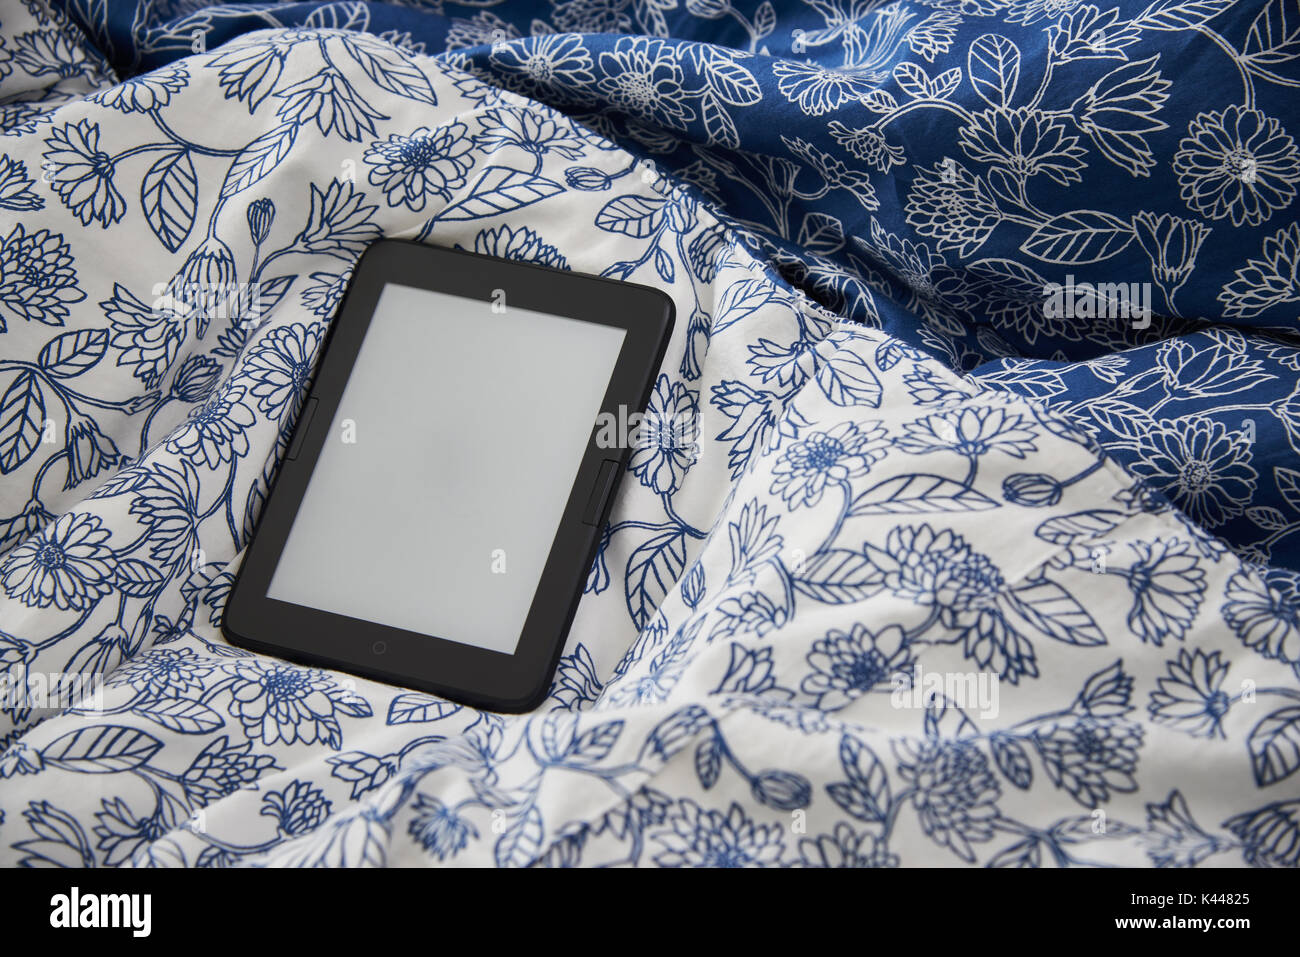 ebook device with blank screen on a blanket. The e-book device is a dedicated device for reading e-books. Stock Photo